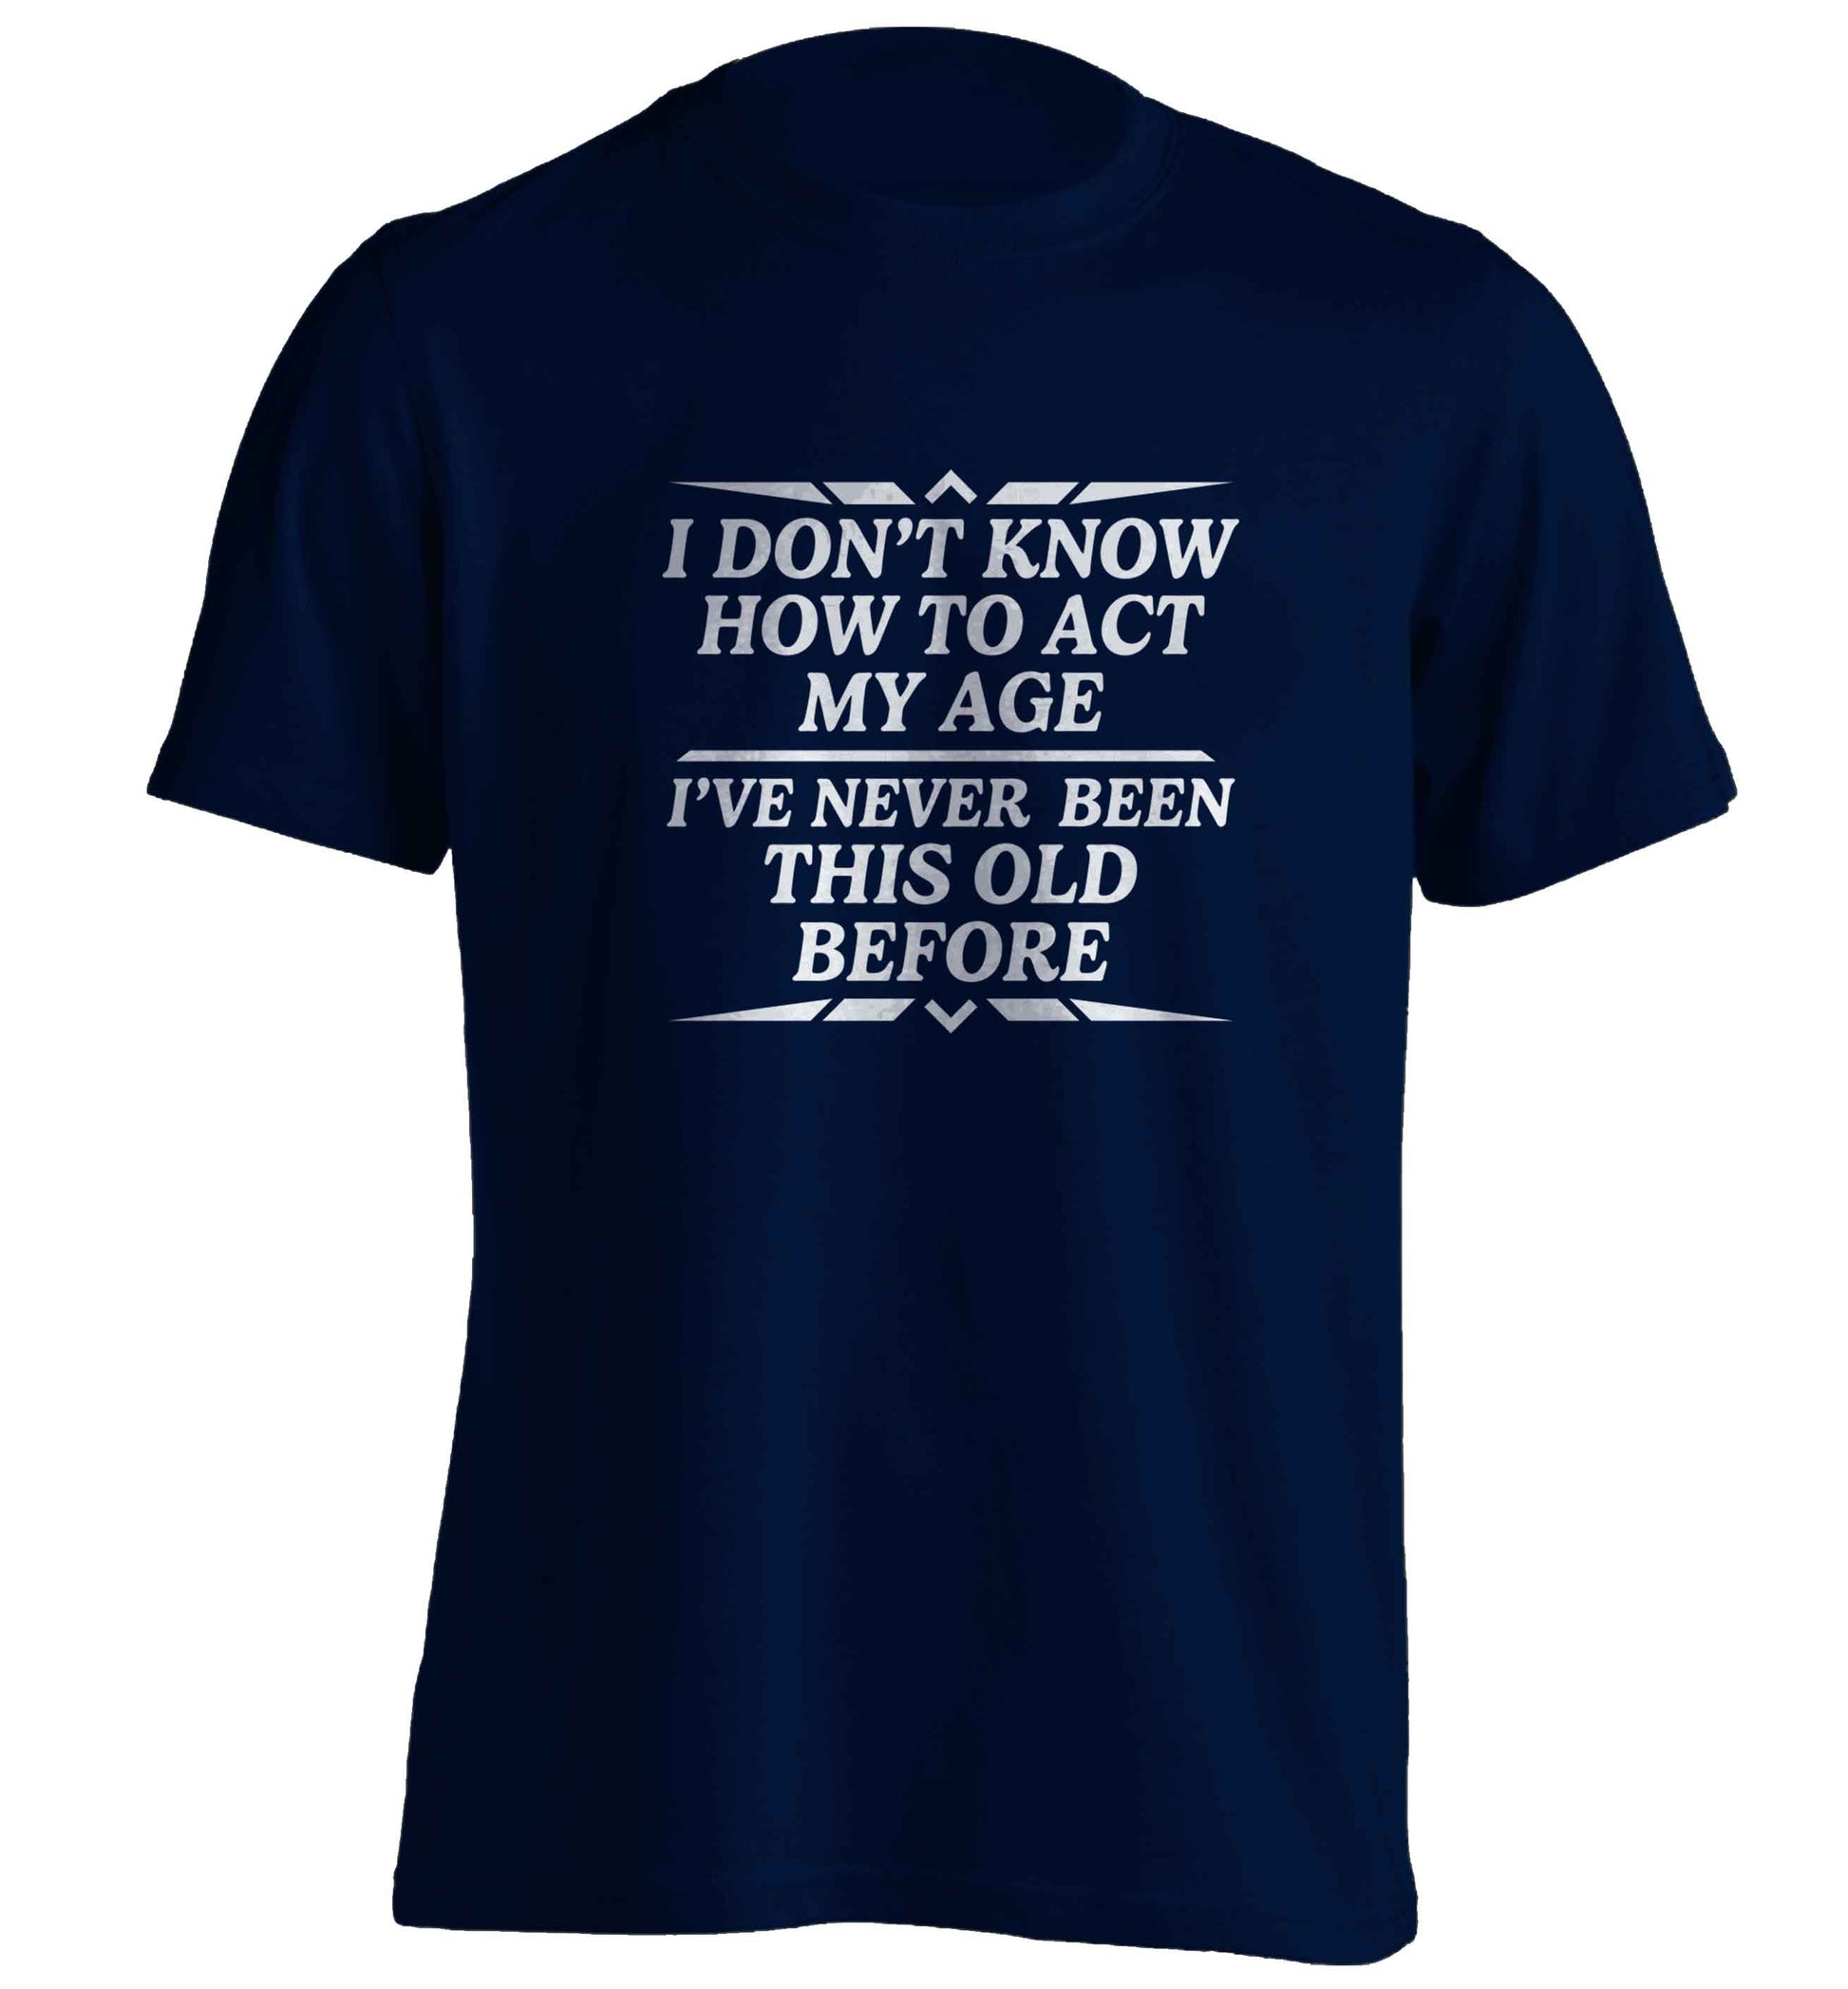 I don't know how to act my age I've never been this old before adults unisex navy Tshirt 2XL